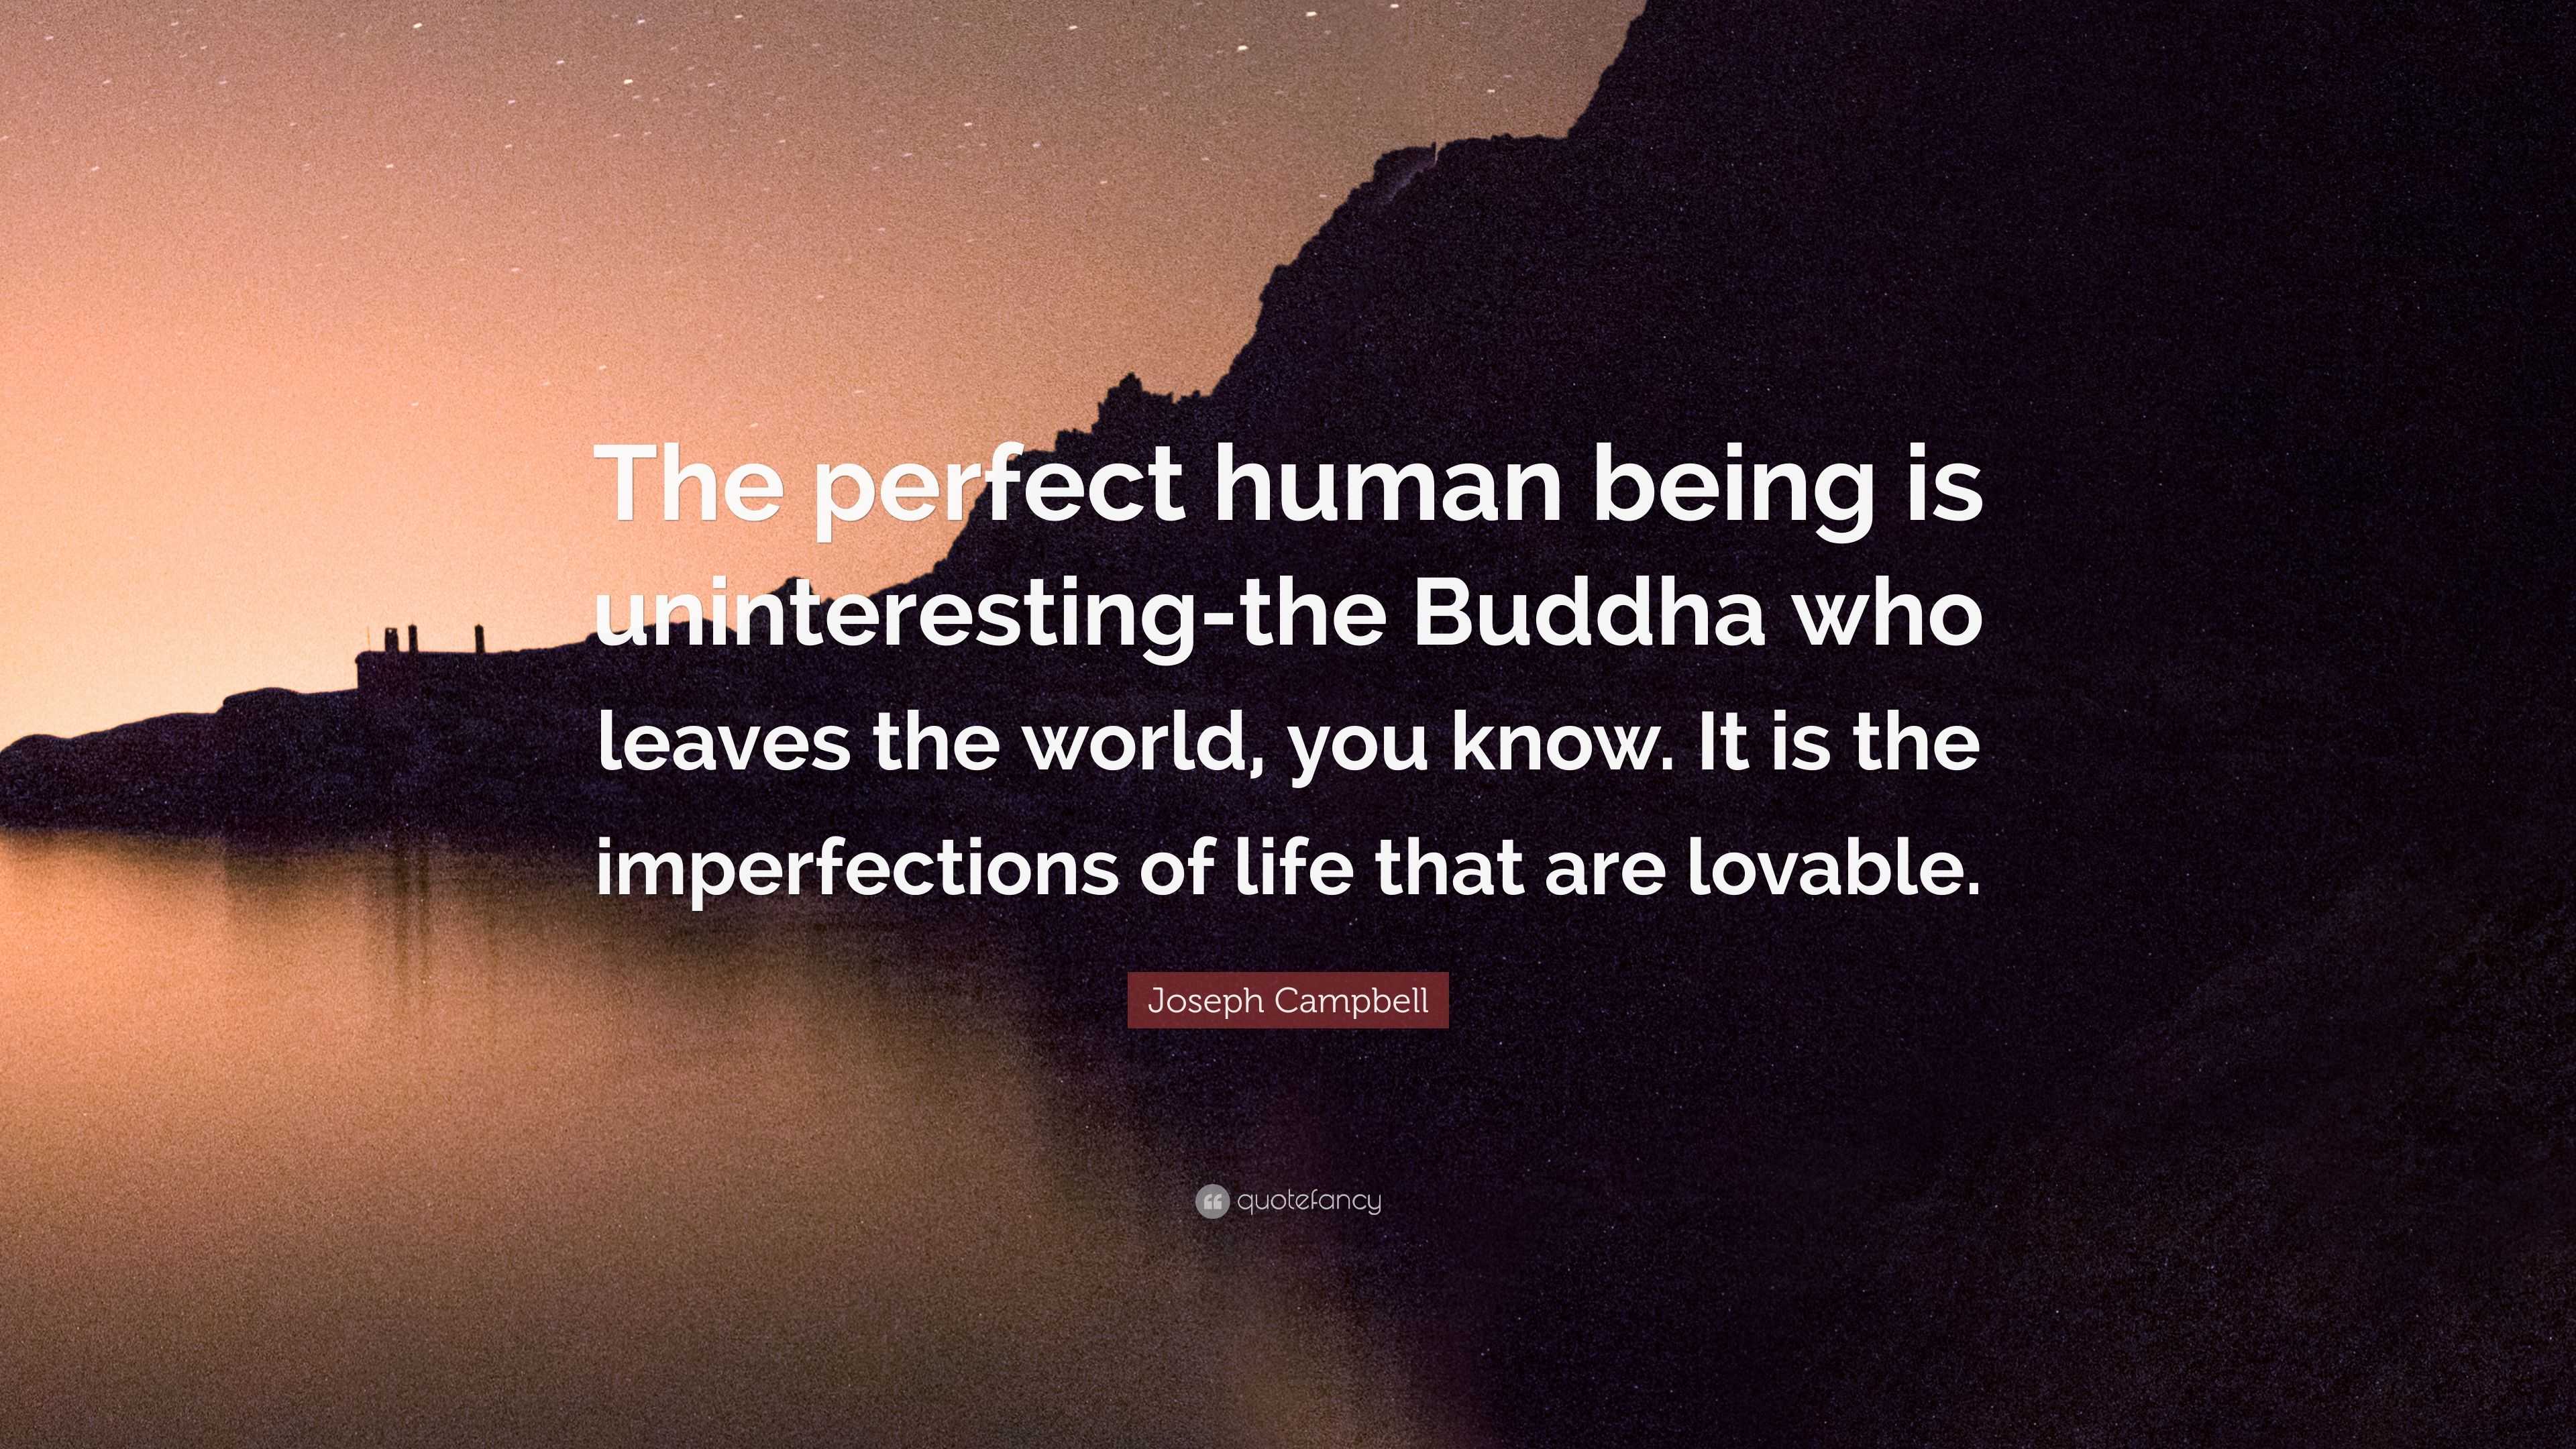 Joseph Campbell Quote: “The perfect human being is uninteresting-the ...